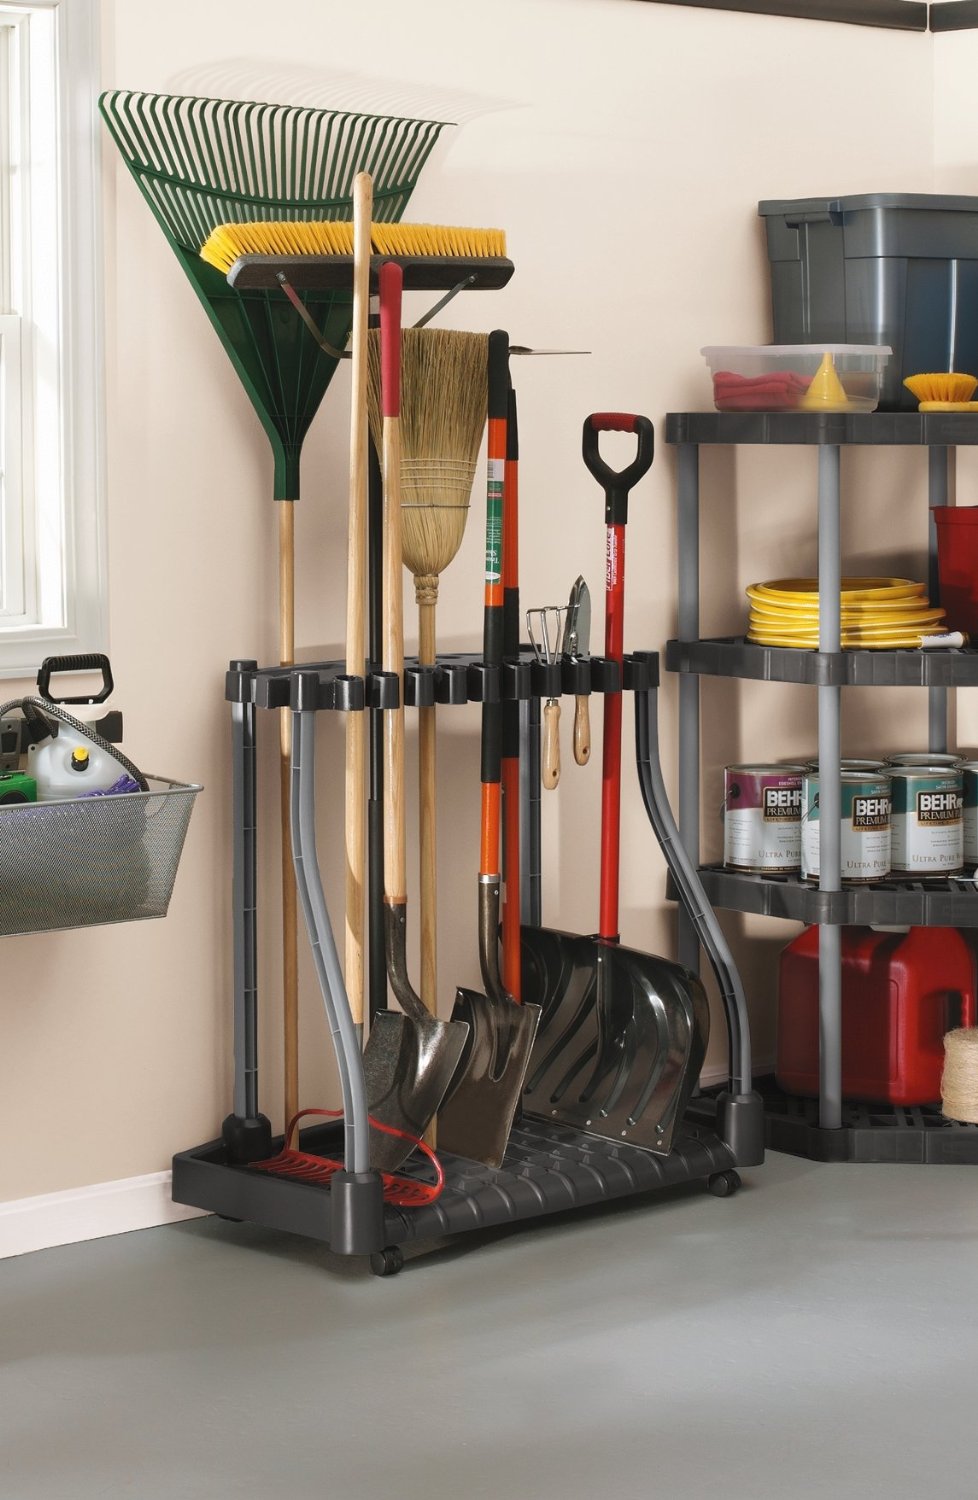 Rubbermaid Deluxe tool tower for $35 via Amazon